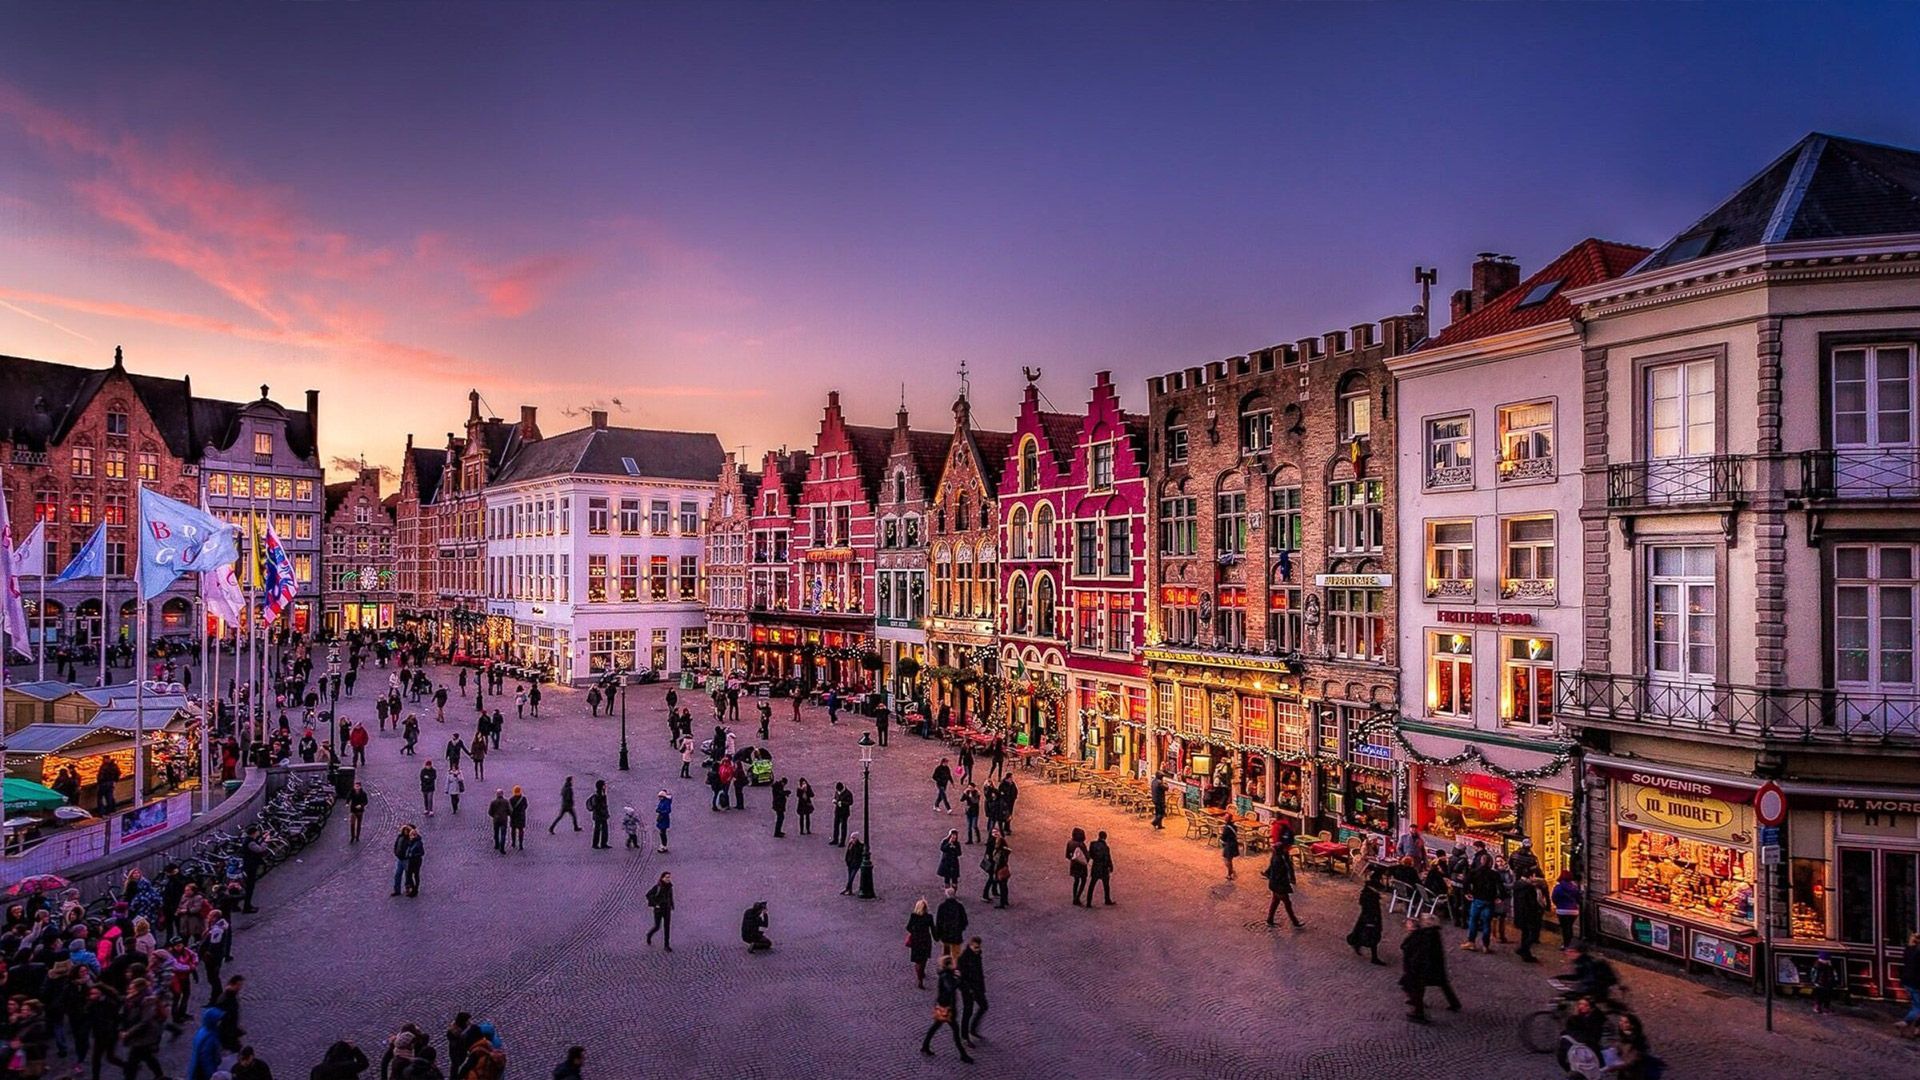 With PayPorter, you can make fast, easy and safe money transfers to Belgium at the most affordable prices!